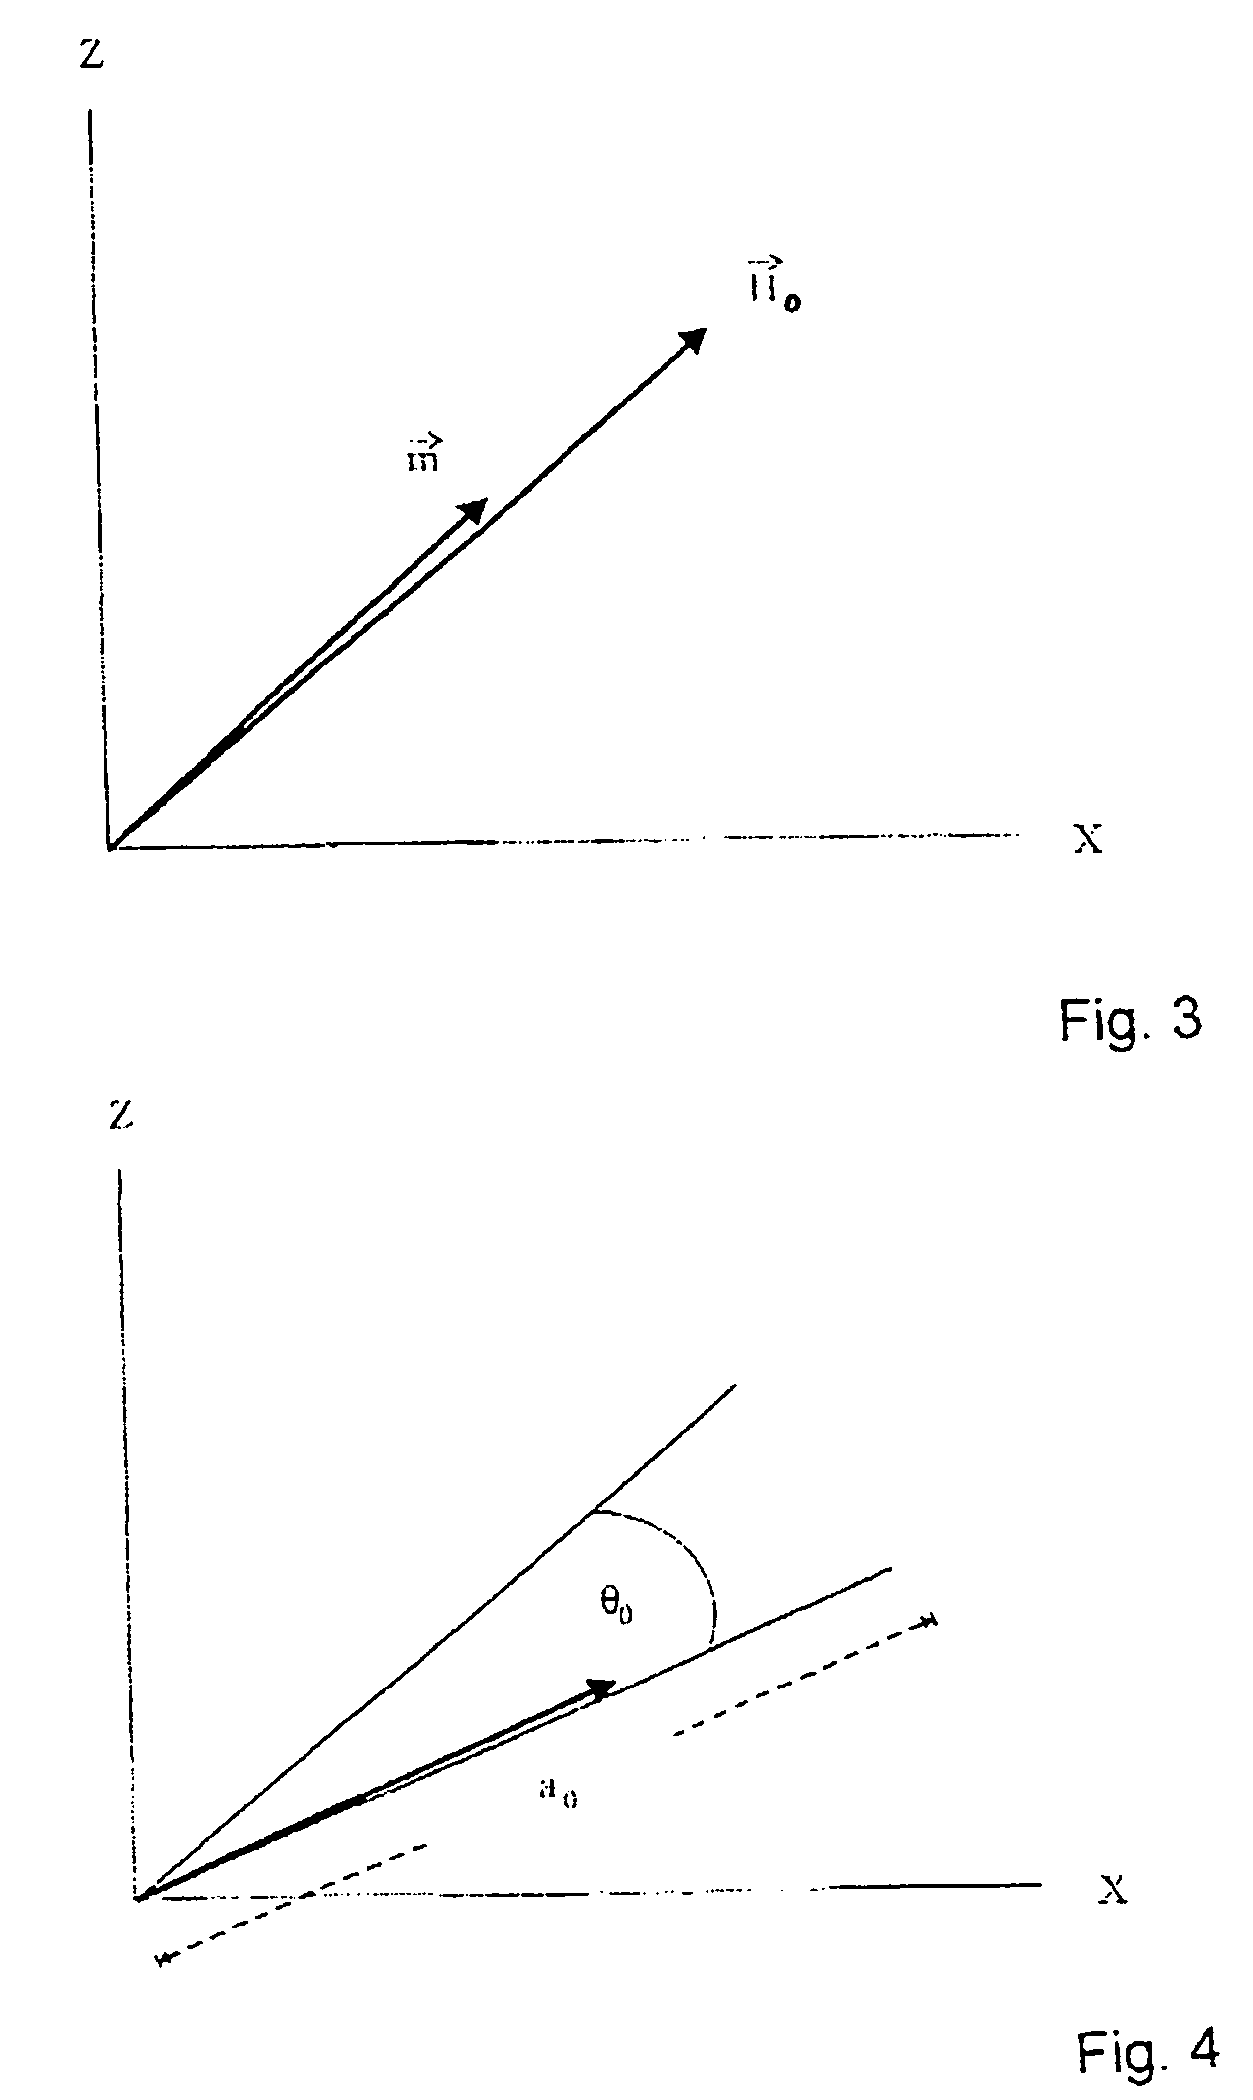 Method for calculating frequency and amplitude modulation for adiabatic electro magnetic pulses